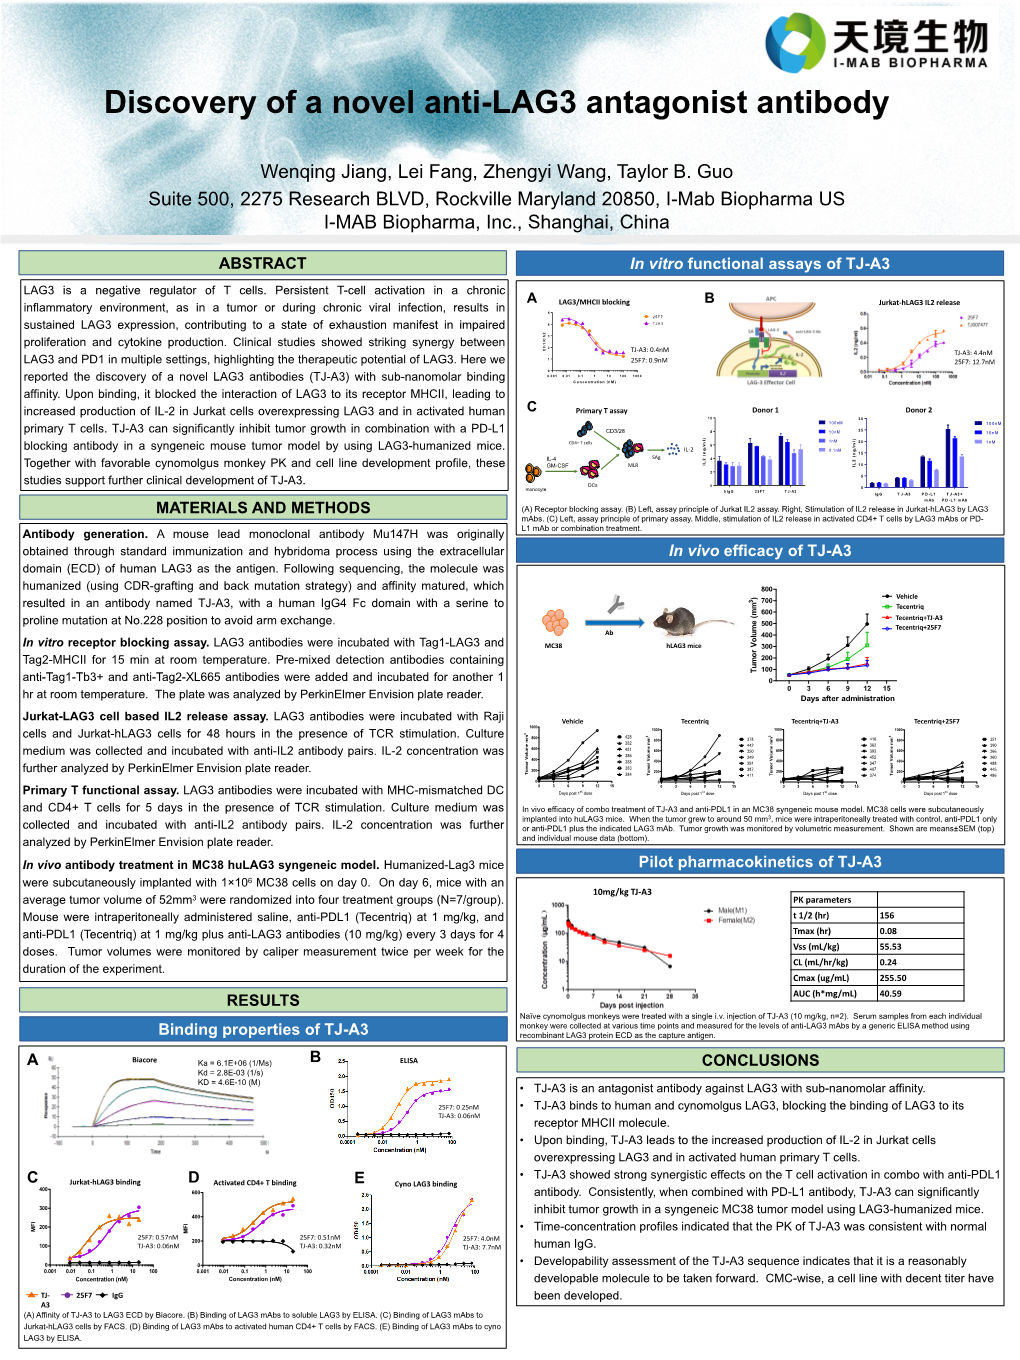 Poster Presentation at the 2018 SITC Meeting